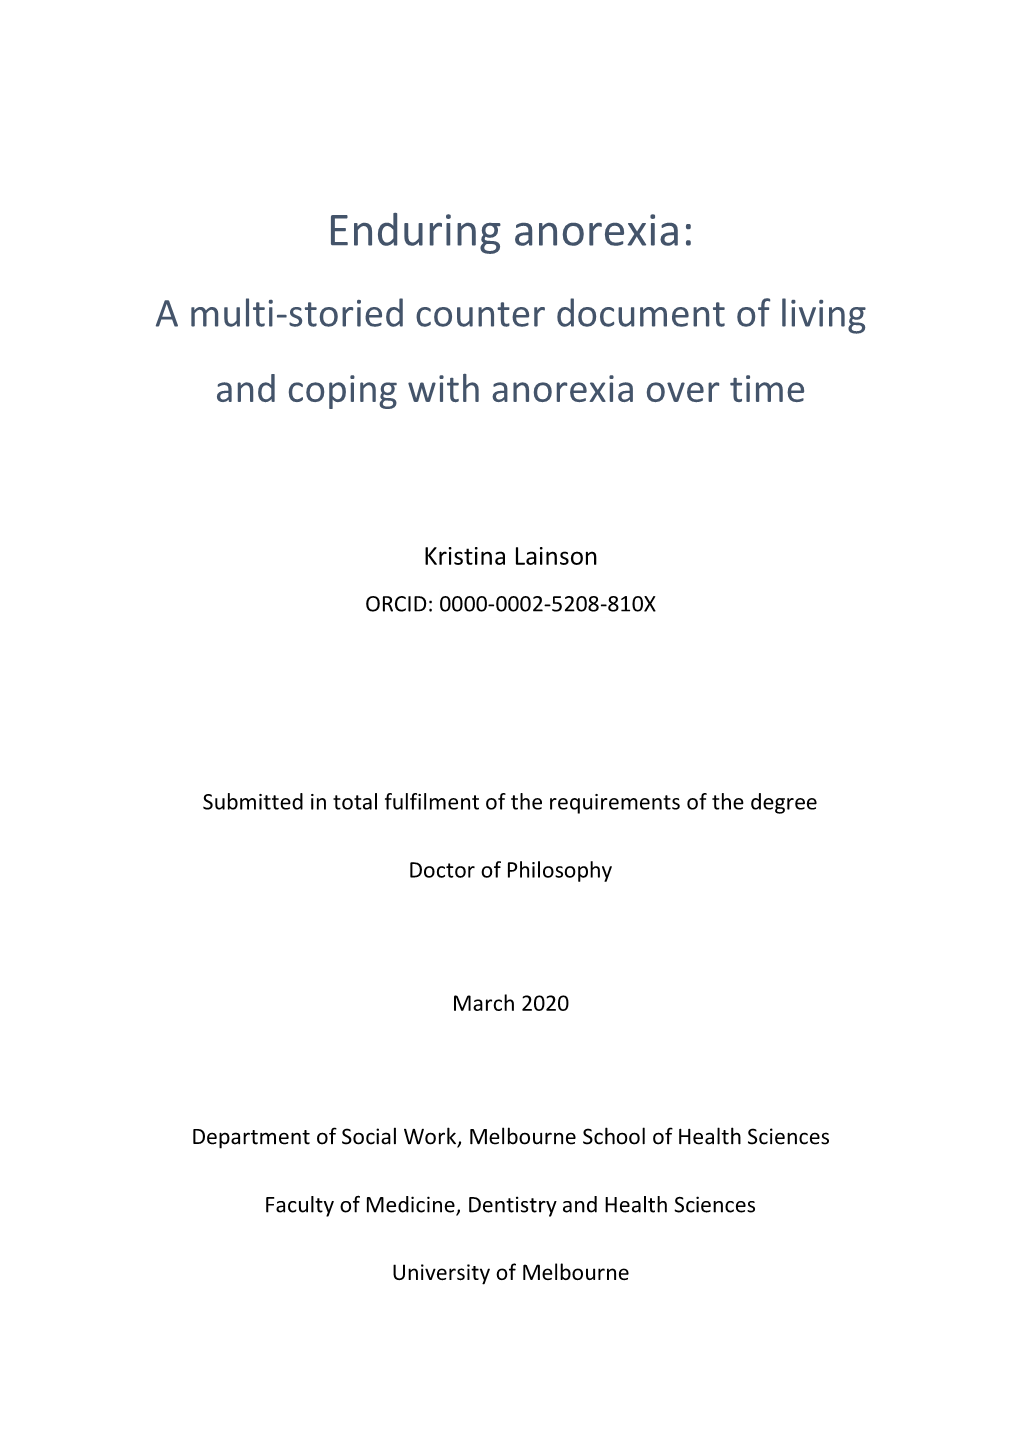 Enduring Anorexia Draft Thesis 26 February 2020